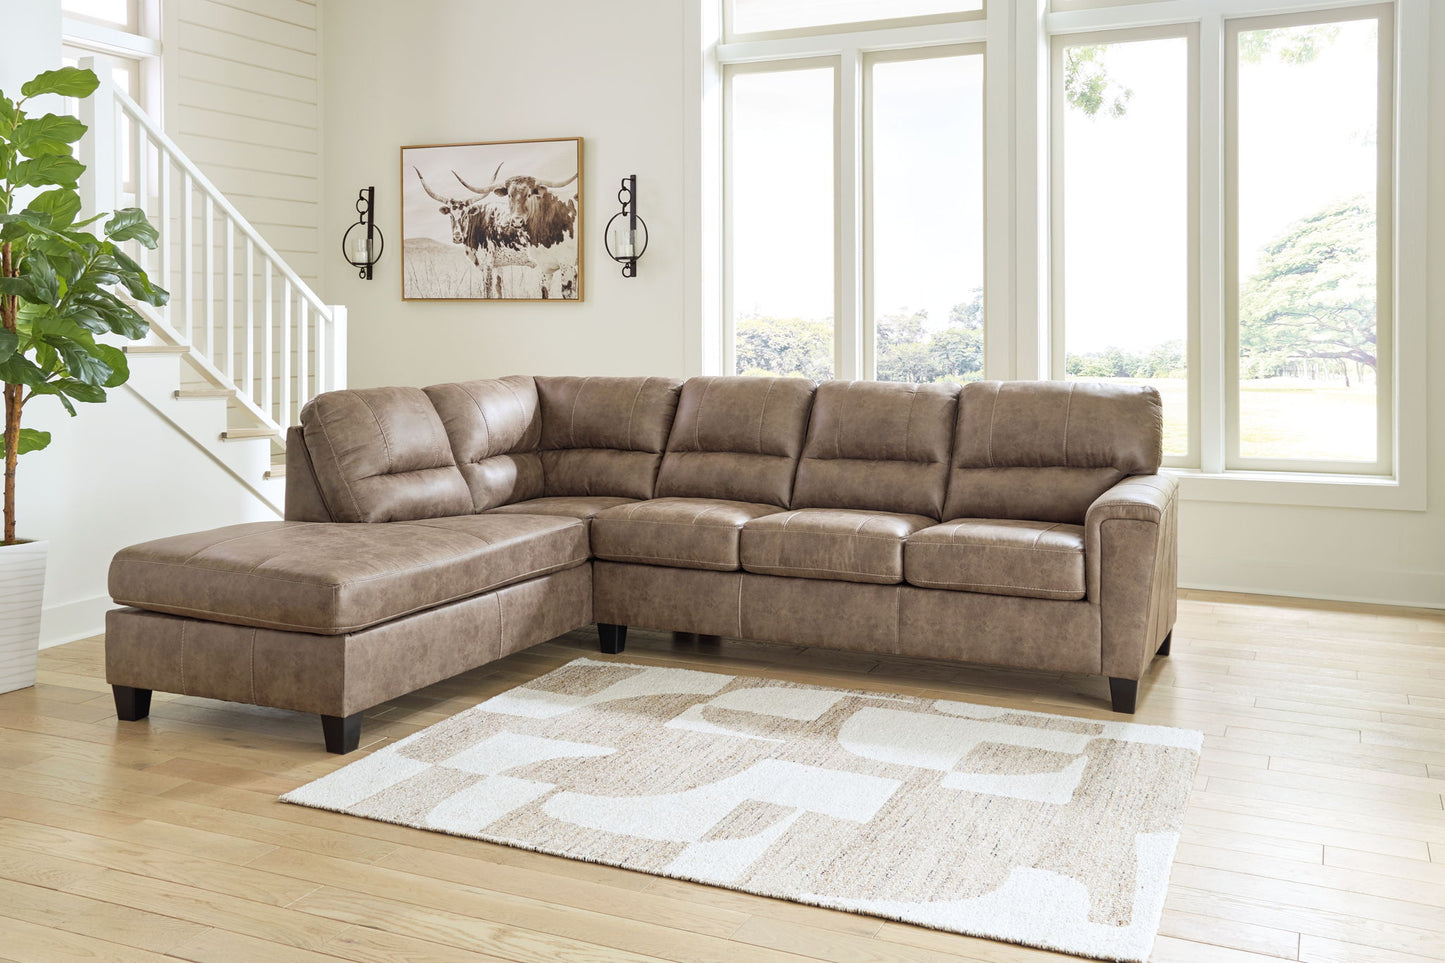 Navi - Fossil - 2-Piece Sectional Sofa Sleeper With Laf Corner Chaise